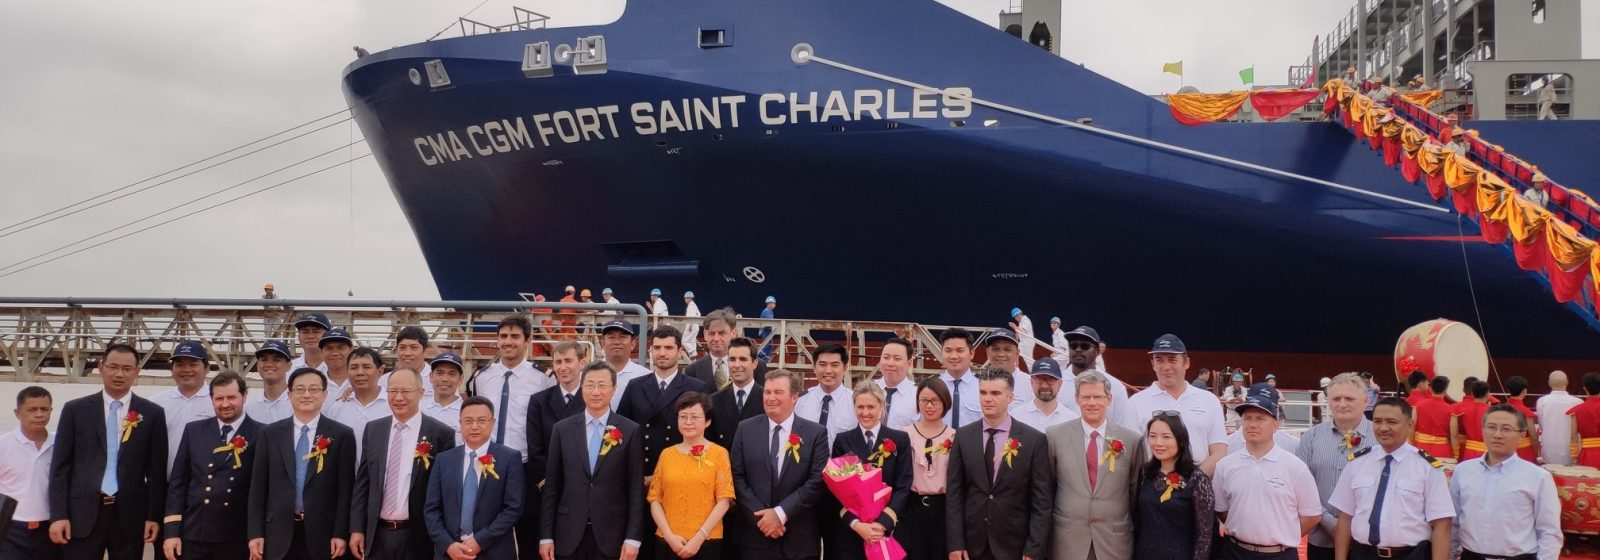 Oplevering 'CMA CGM Fort Saint Charles' in 2019